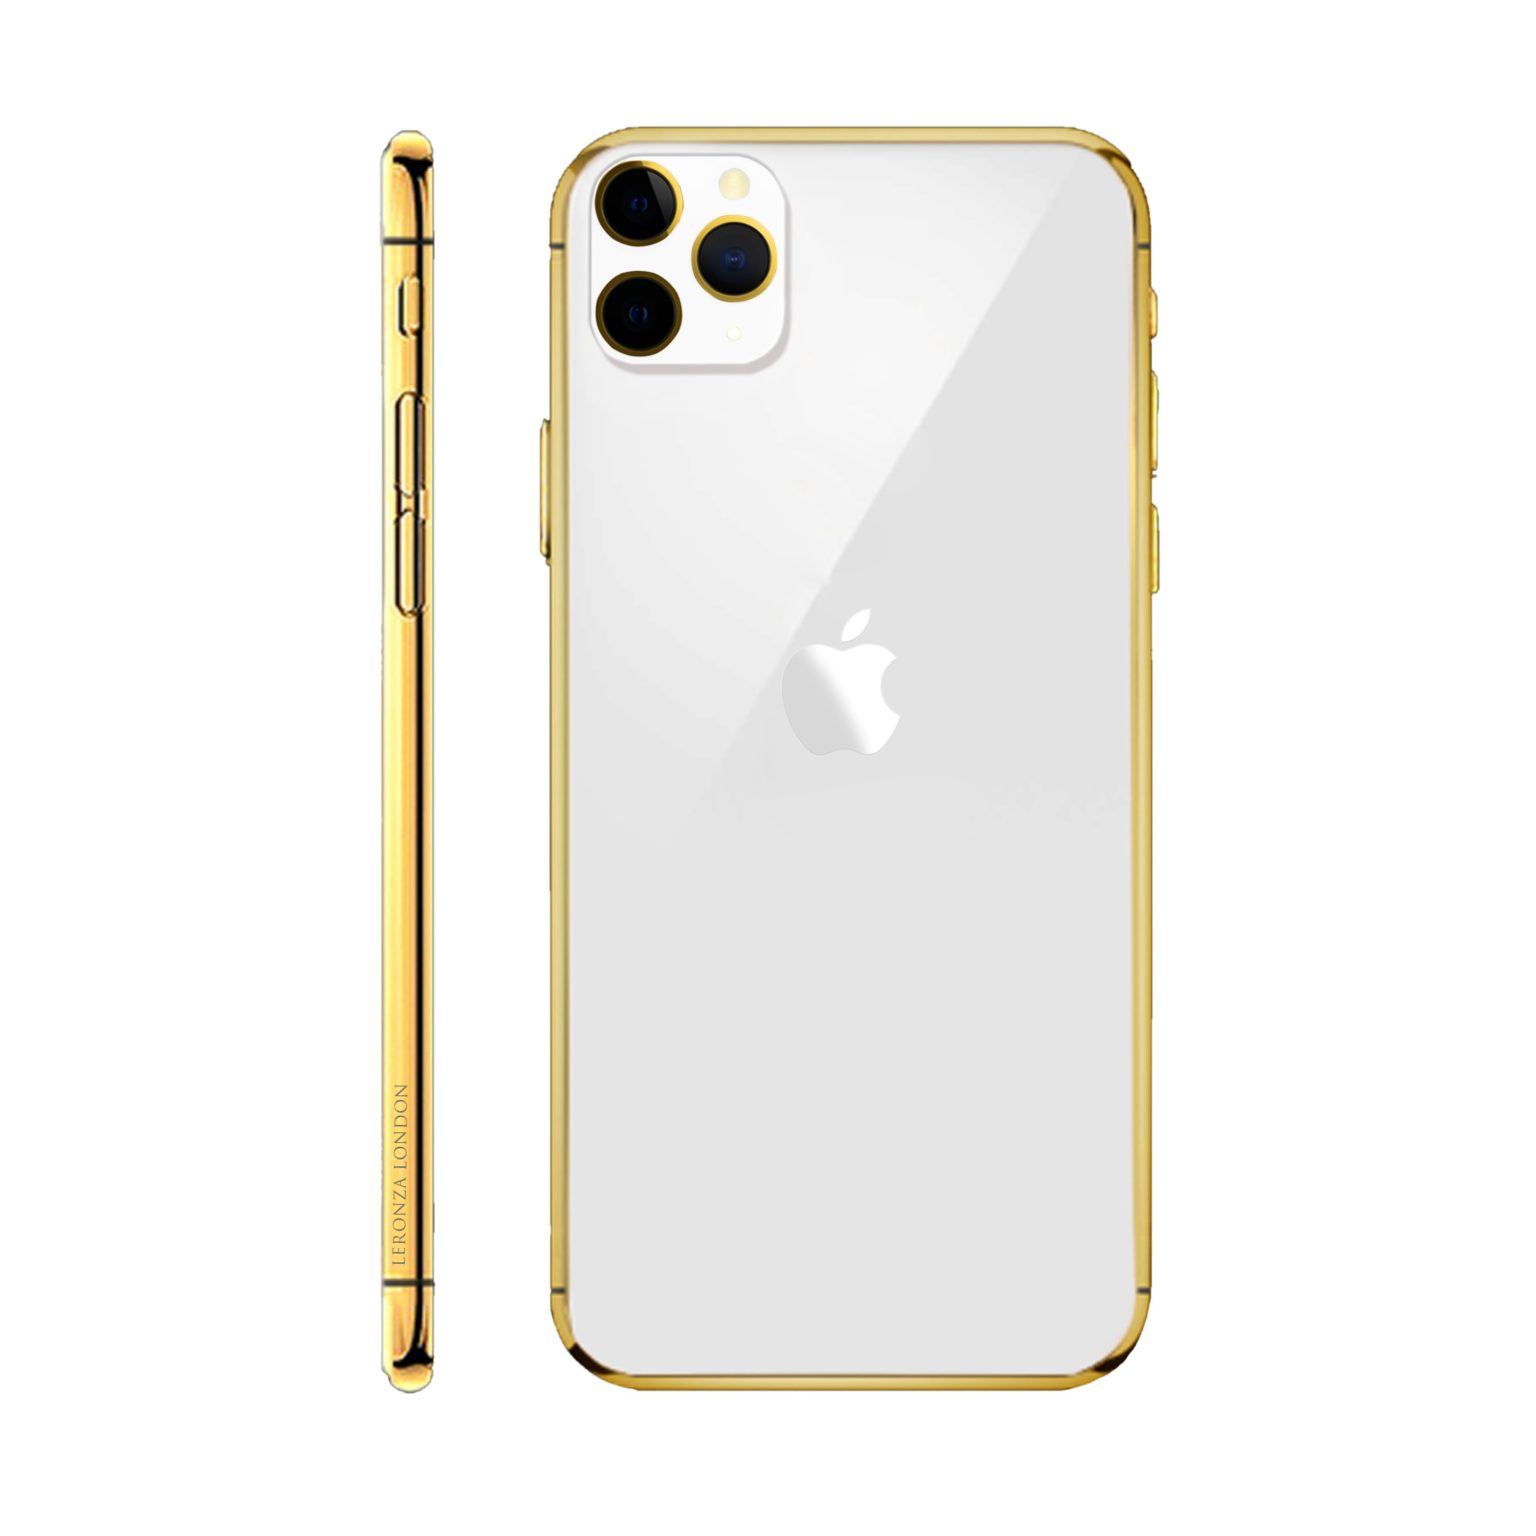 24k Gold Classic iPhone 11 Pro and 11 Pro Max - Leronza